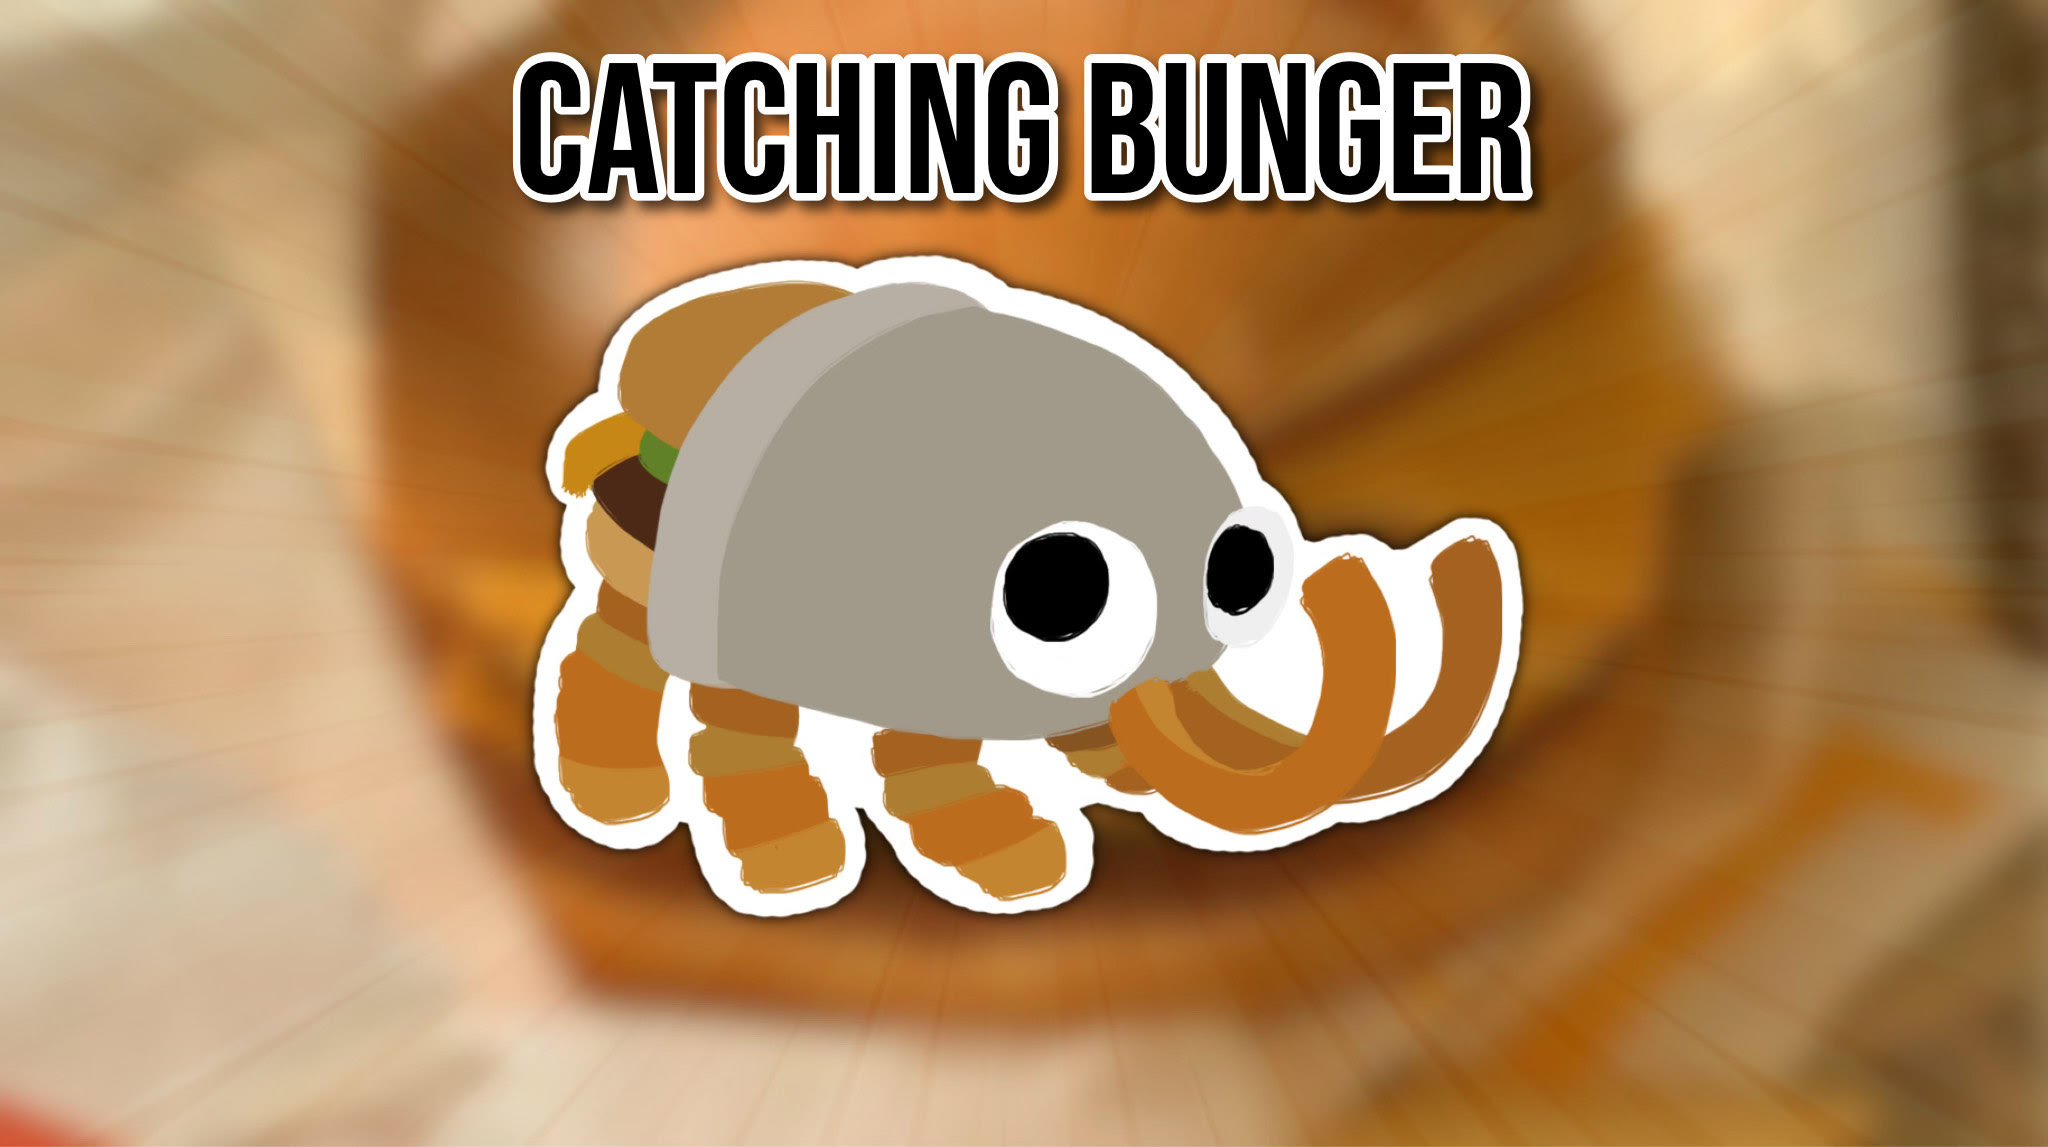 Catching Bunger in Bugsnax